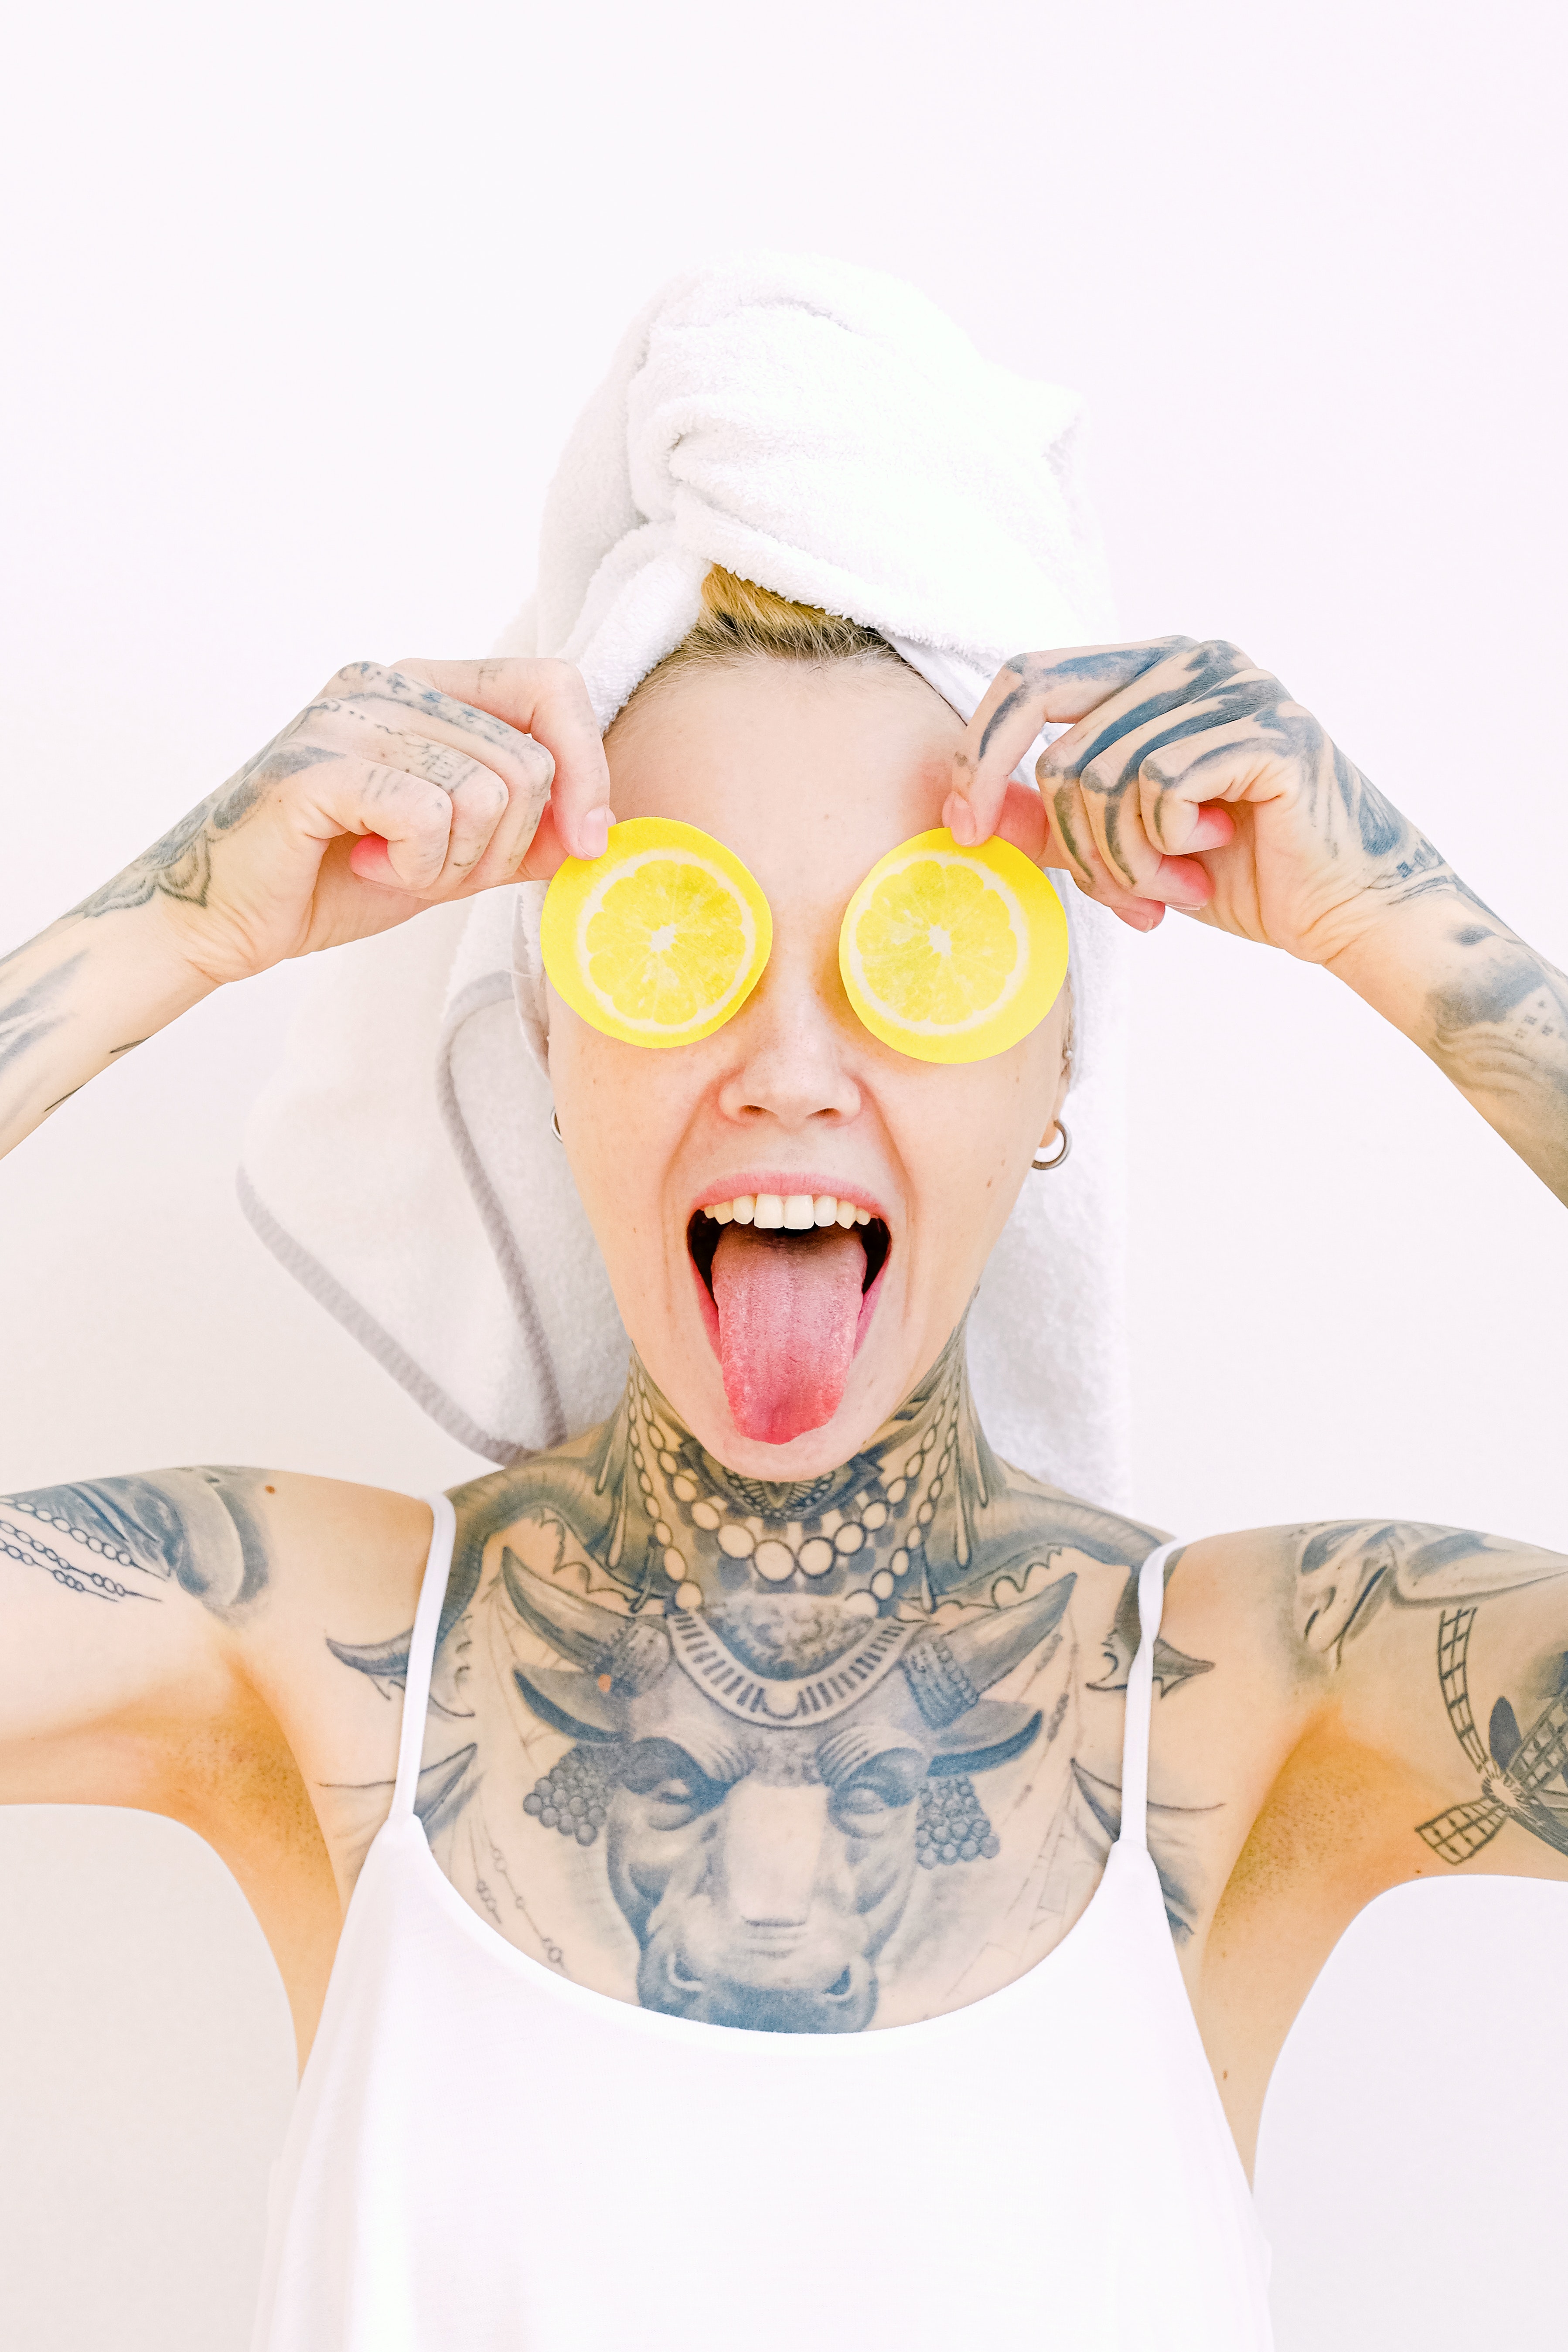 A woman holding lemon slices over her eyes and sticking her tongue out. | Source: Pexels